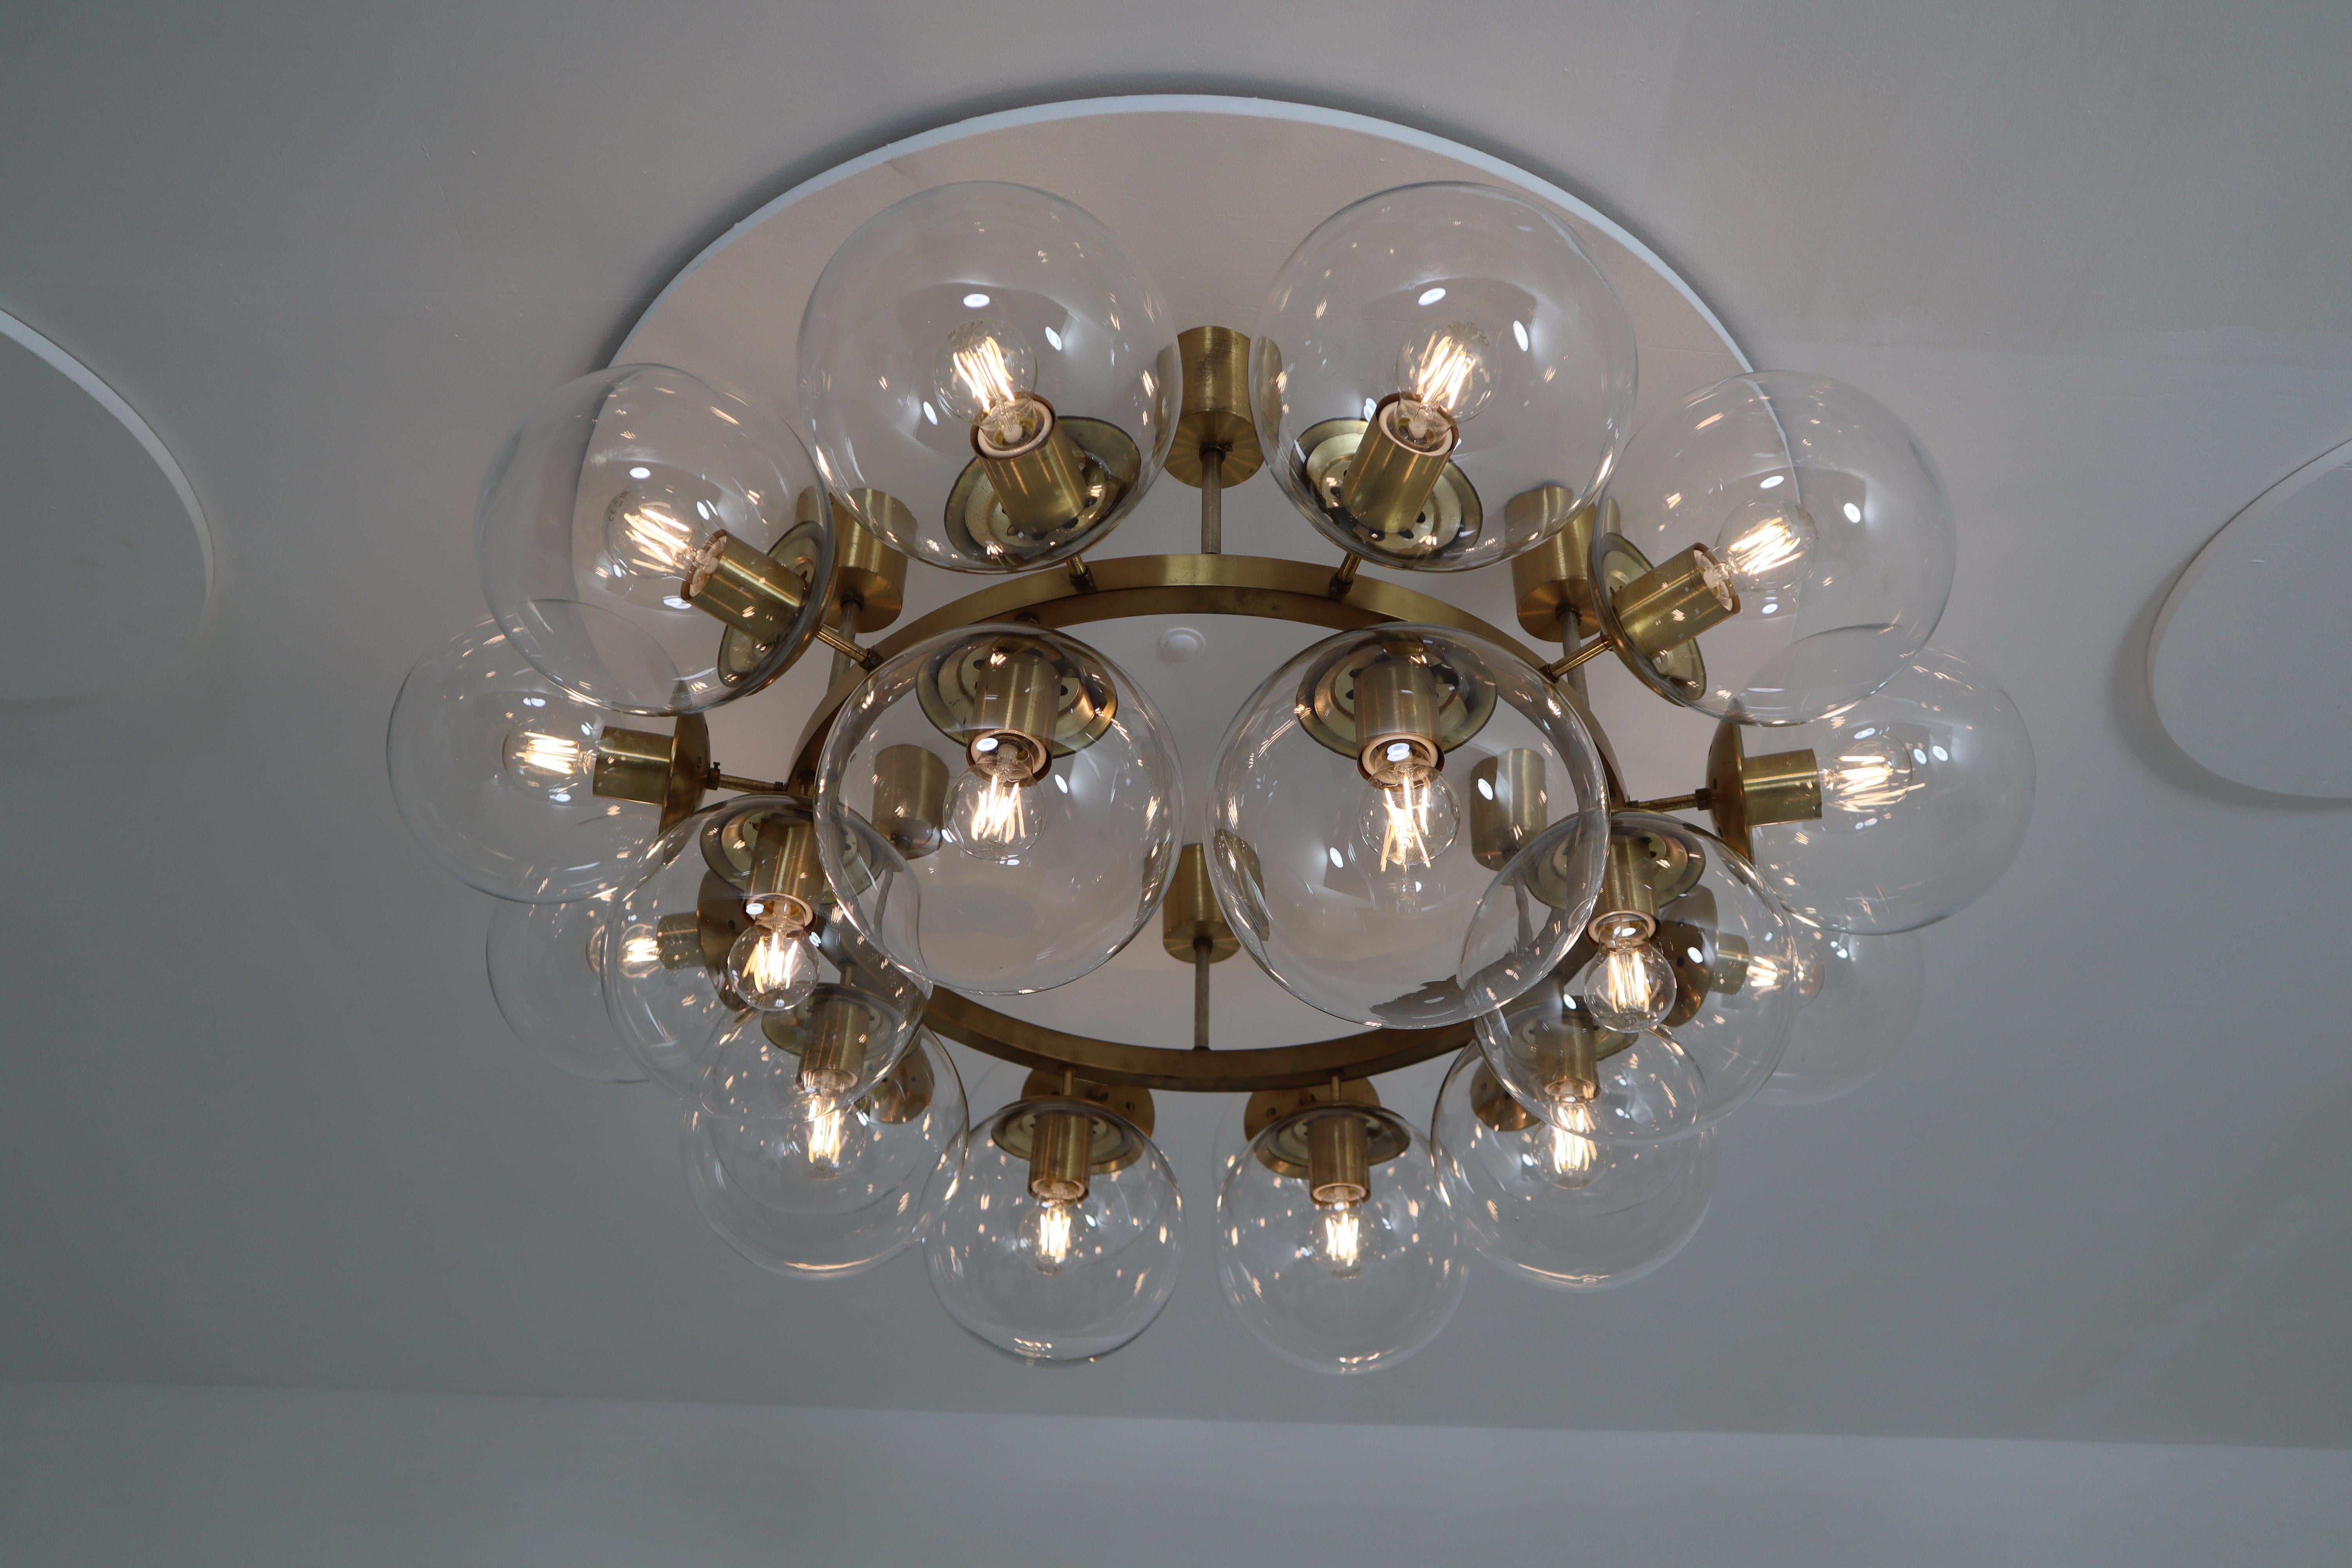 Large Hotel Chandelier in Brass Fixture and 20 Large Hand-Blowed Glass Globes  10